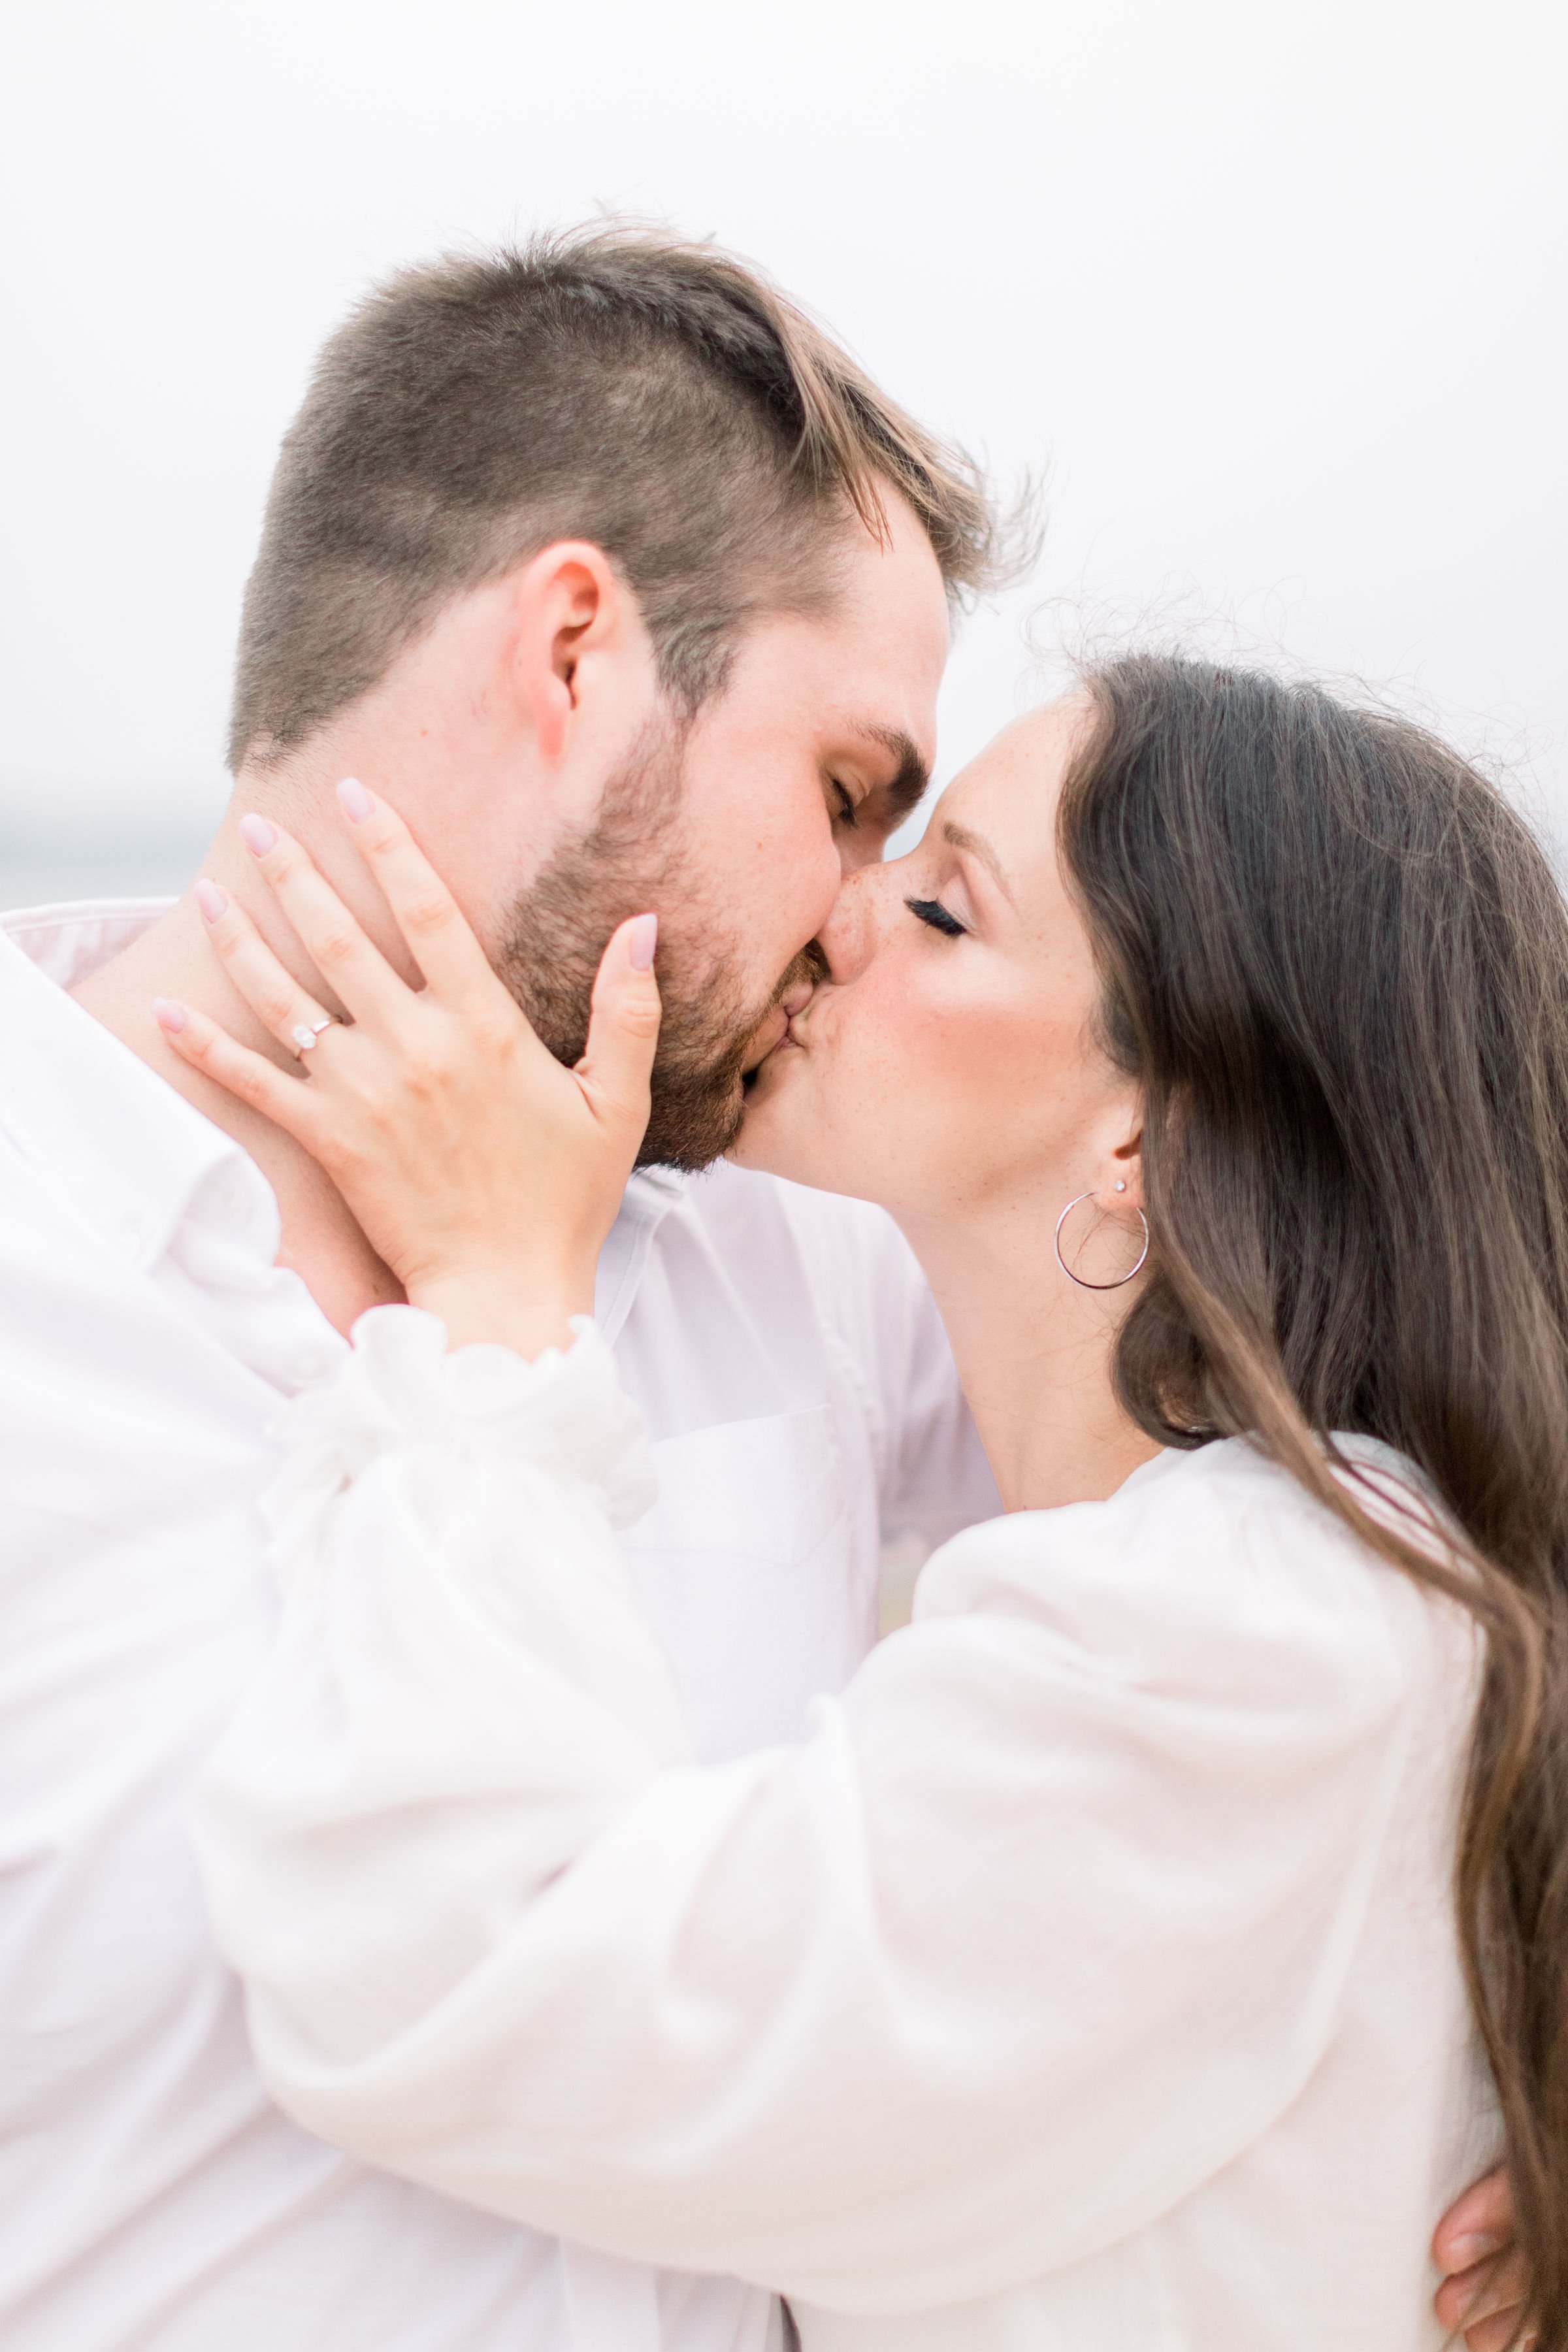  Bright and airy portrait of engaged couple kissing at Grass Creek Park by Chelsea Mason Photography. bright kissing pic #Kingstonengagement #GrassCreekParkPortraits #Ontarioengagementphotographers #Chelseamasonphotography #Chelseamasonengagements 